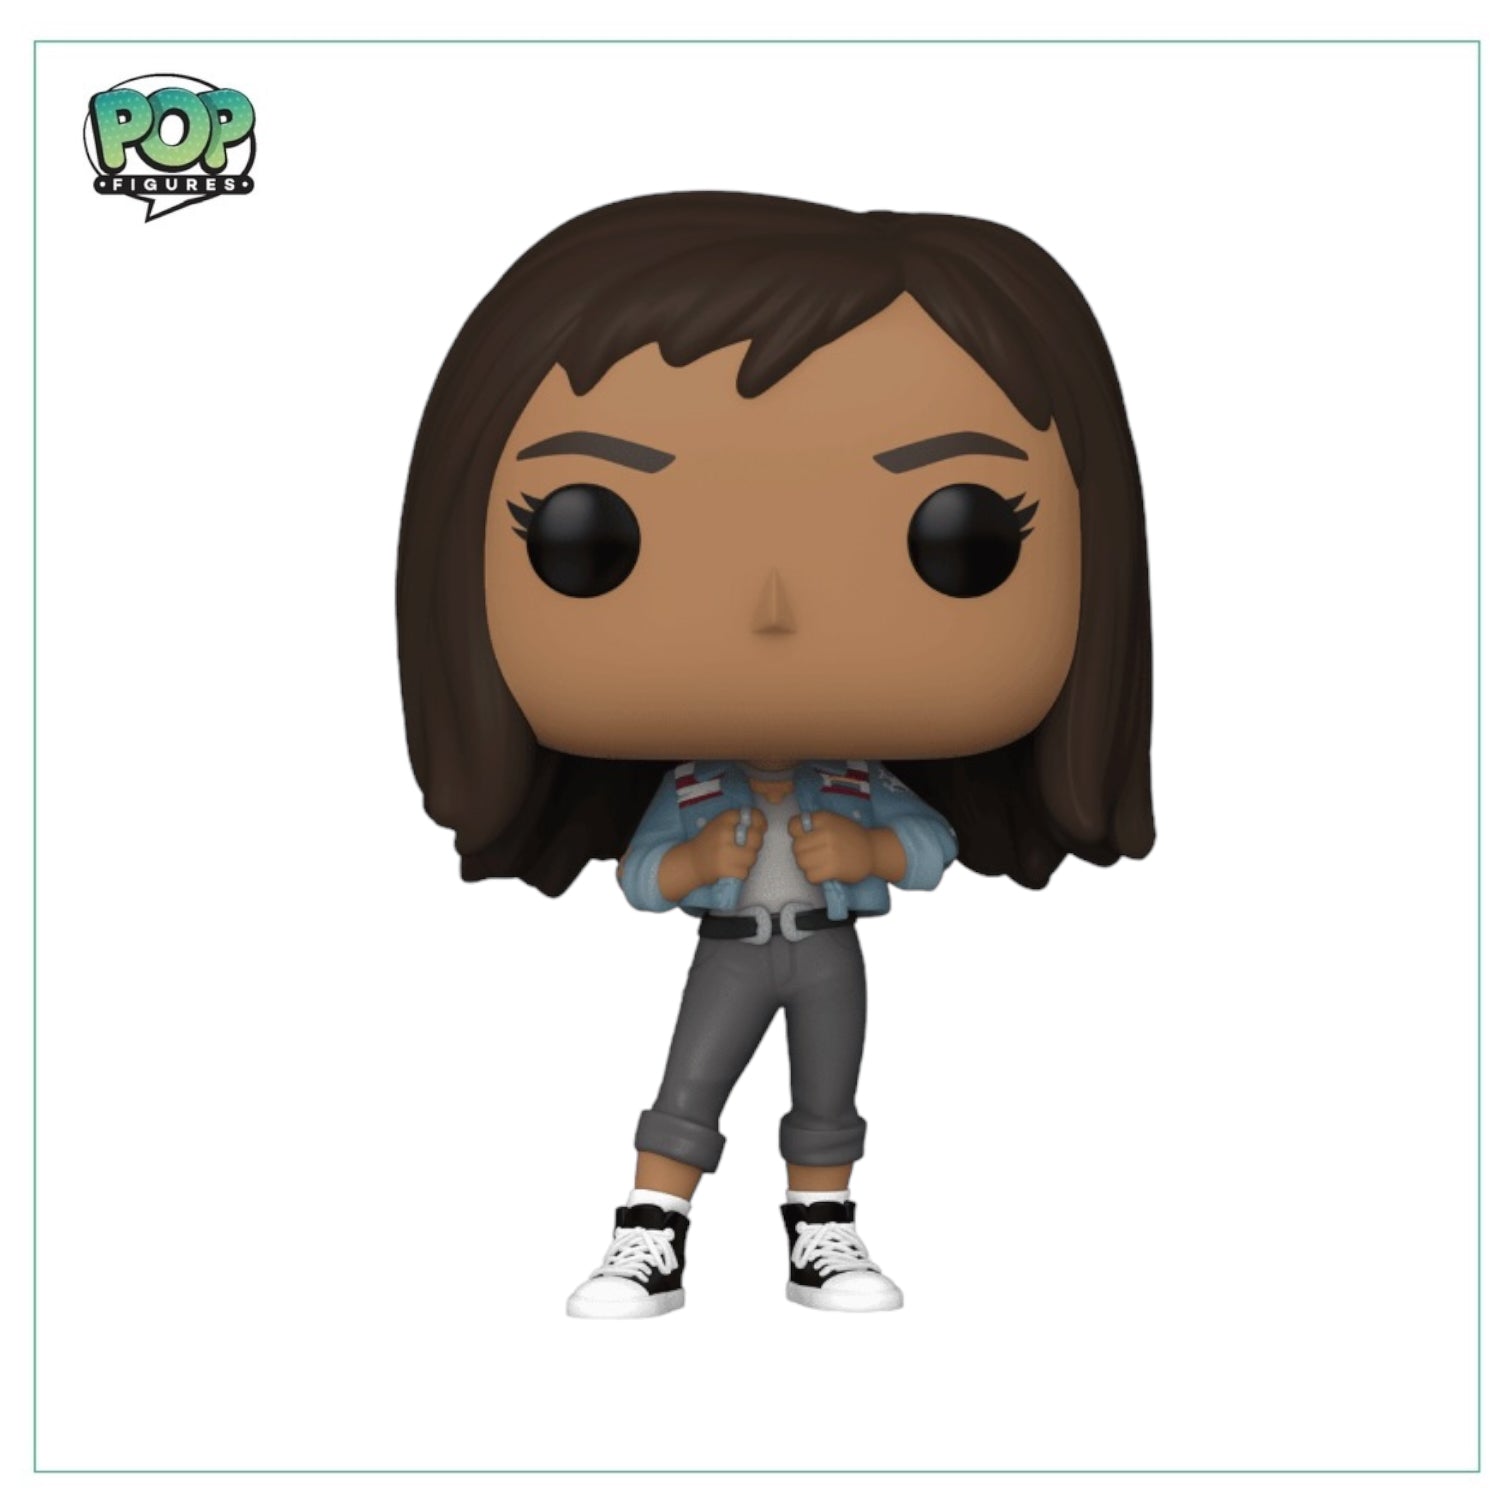 America Chavez #1002 Funko Pop! -  Doctor Strange and the Multiverse of Madness